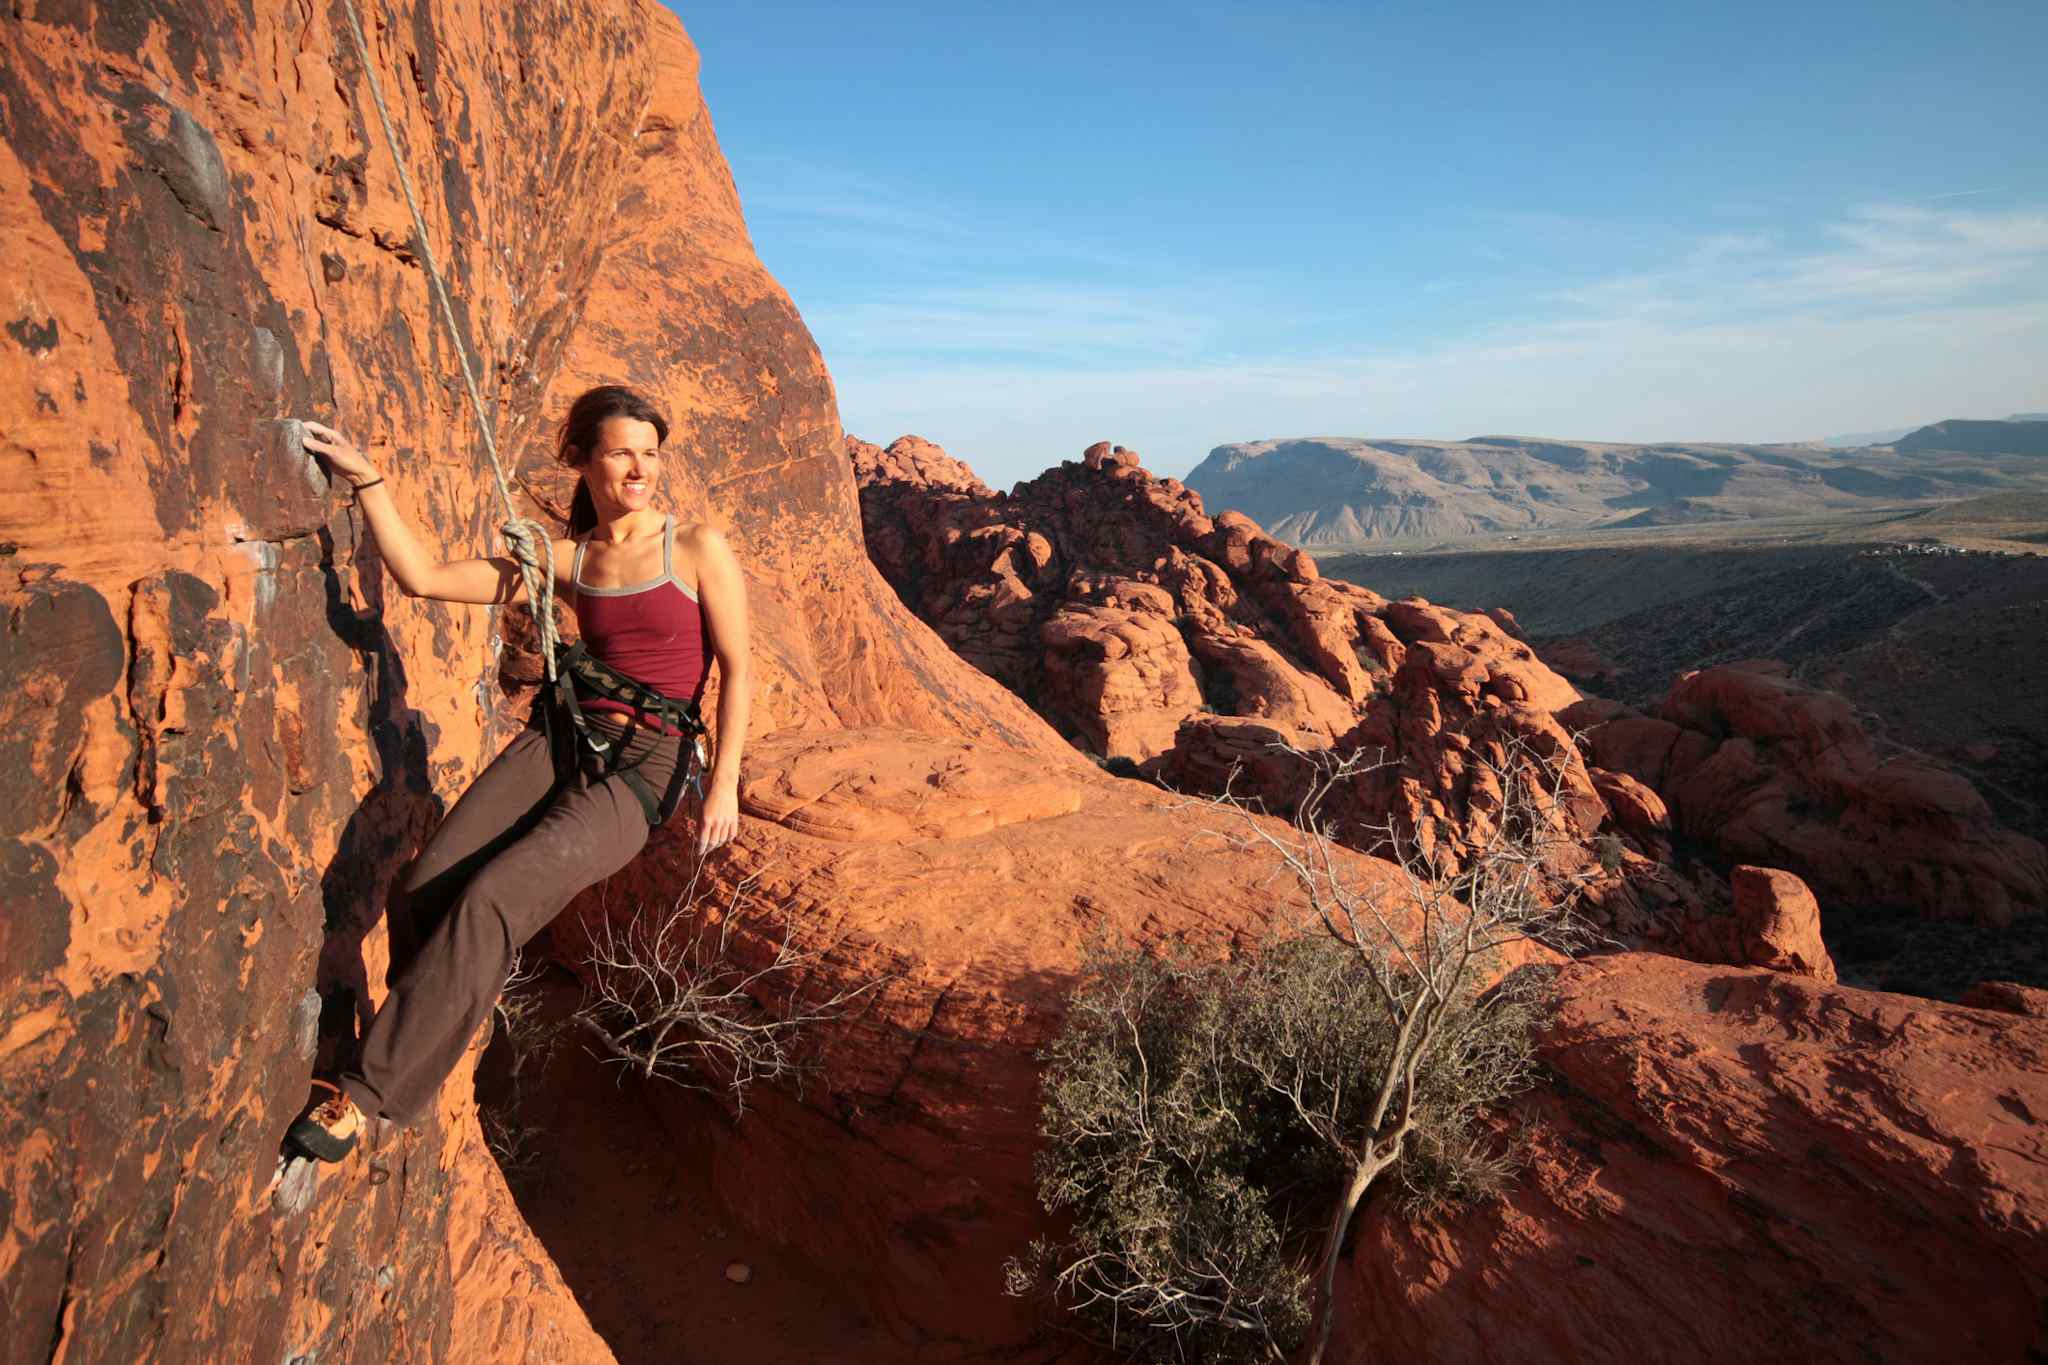 A female rock climber hangs from a rope on the red rock face of Morocco's Todra Gorge. 